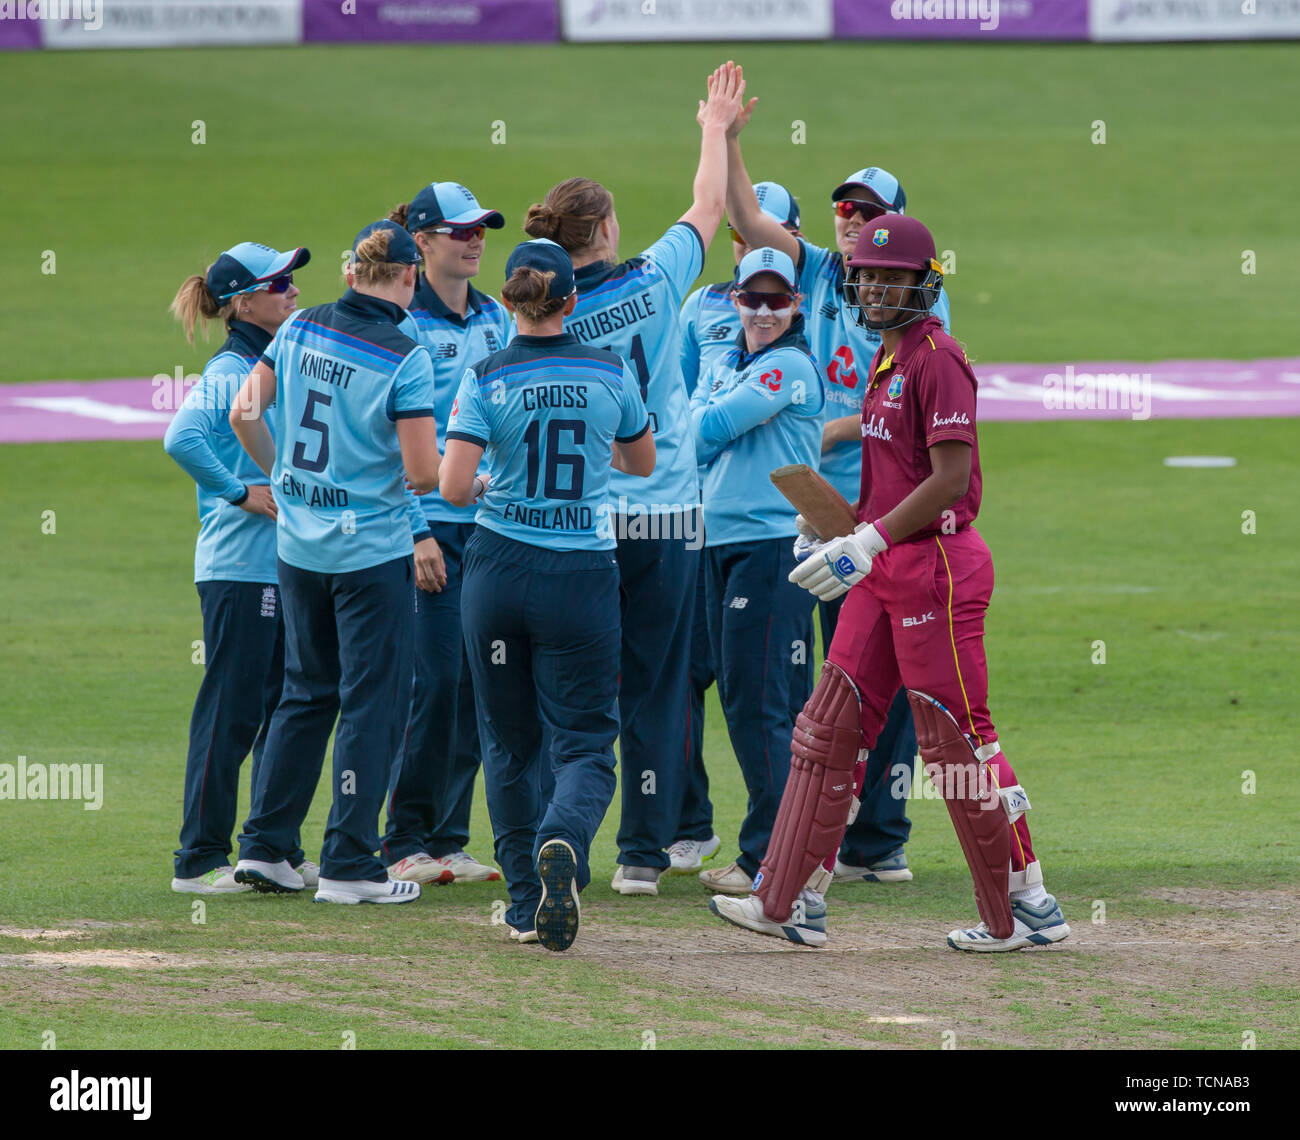 Worcester, UK. 9th June 2019, Blackfinch New Road, Worcester, England, 2nd Royal London Womens Cricket ODI, England versus West Indies; Hayley Matthews (Cpt) has a wry smile as she walks past a jubilant Engand team after being caught behind by Sarah Taylor off the bowling of Anya Shrubsole Credit: Action Plus Sports Images/Alamy Live News Stock Photo